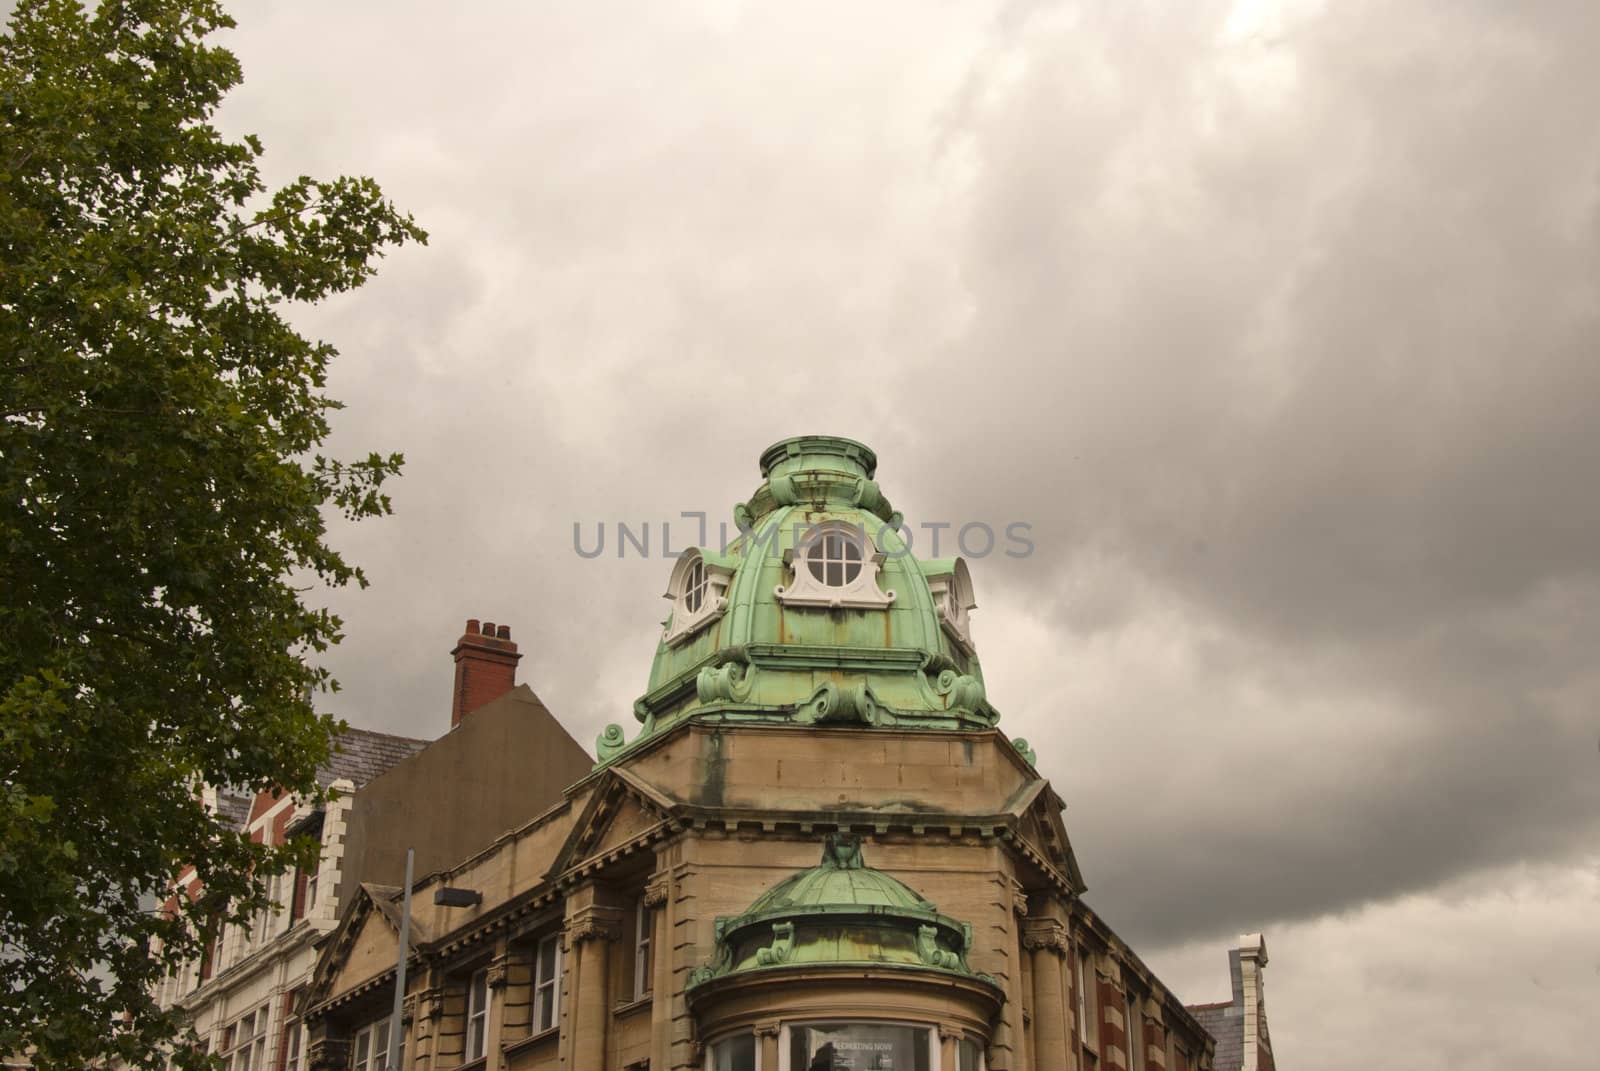 An Ornate Dome on a historic building in Yorkshire England